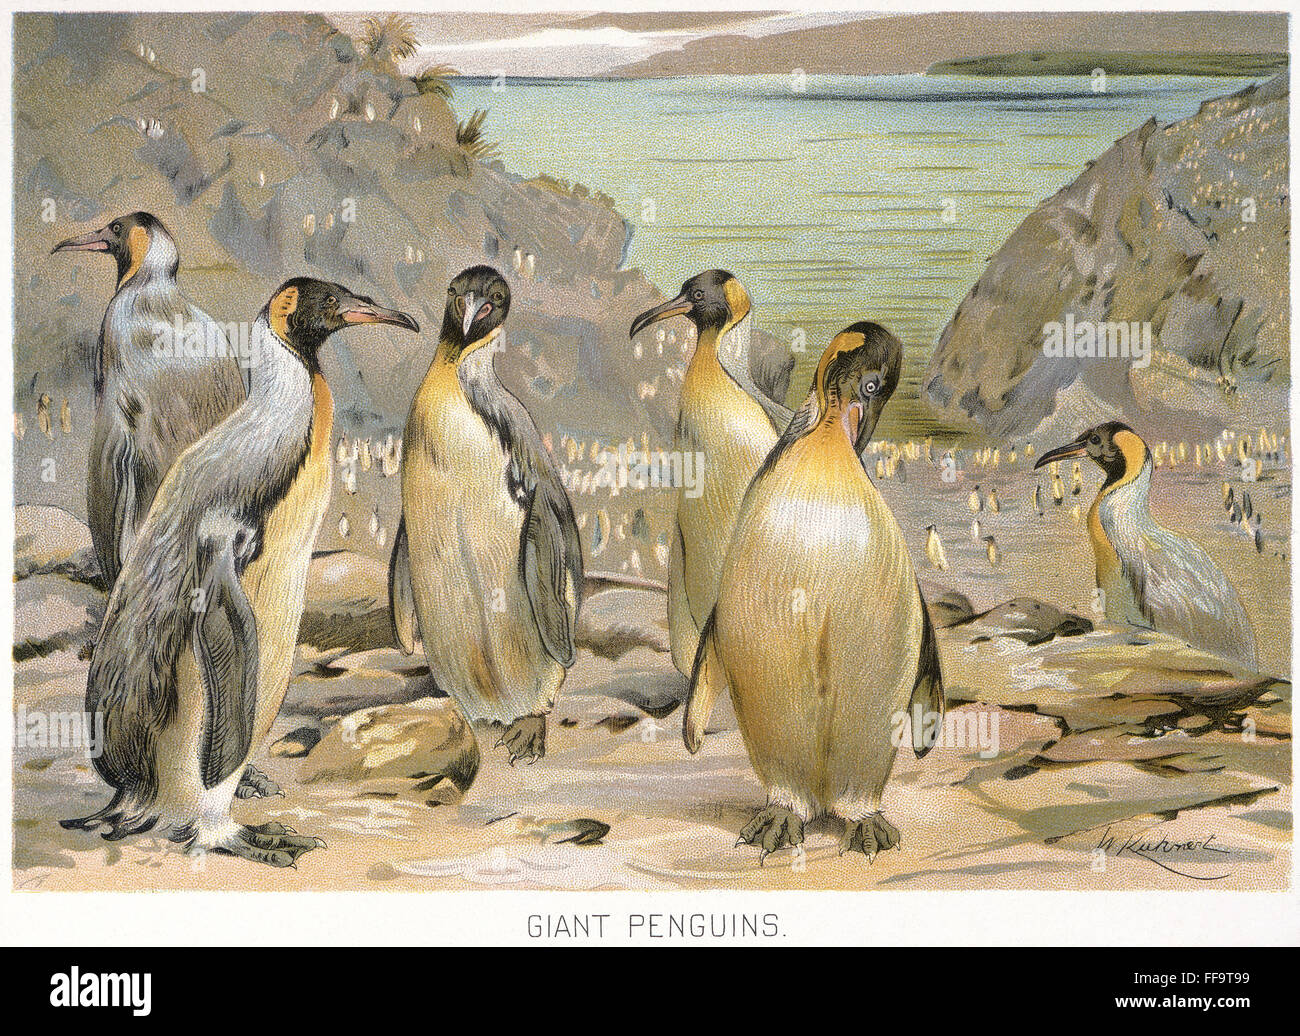 GIANT PENGUINS, c1900. /nAmerican lithograph. Stock Photo